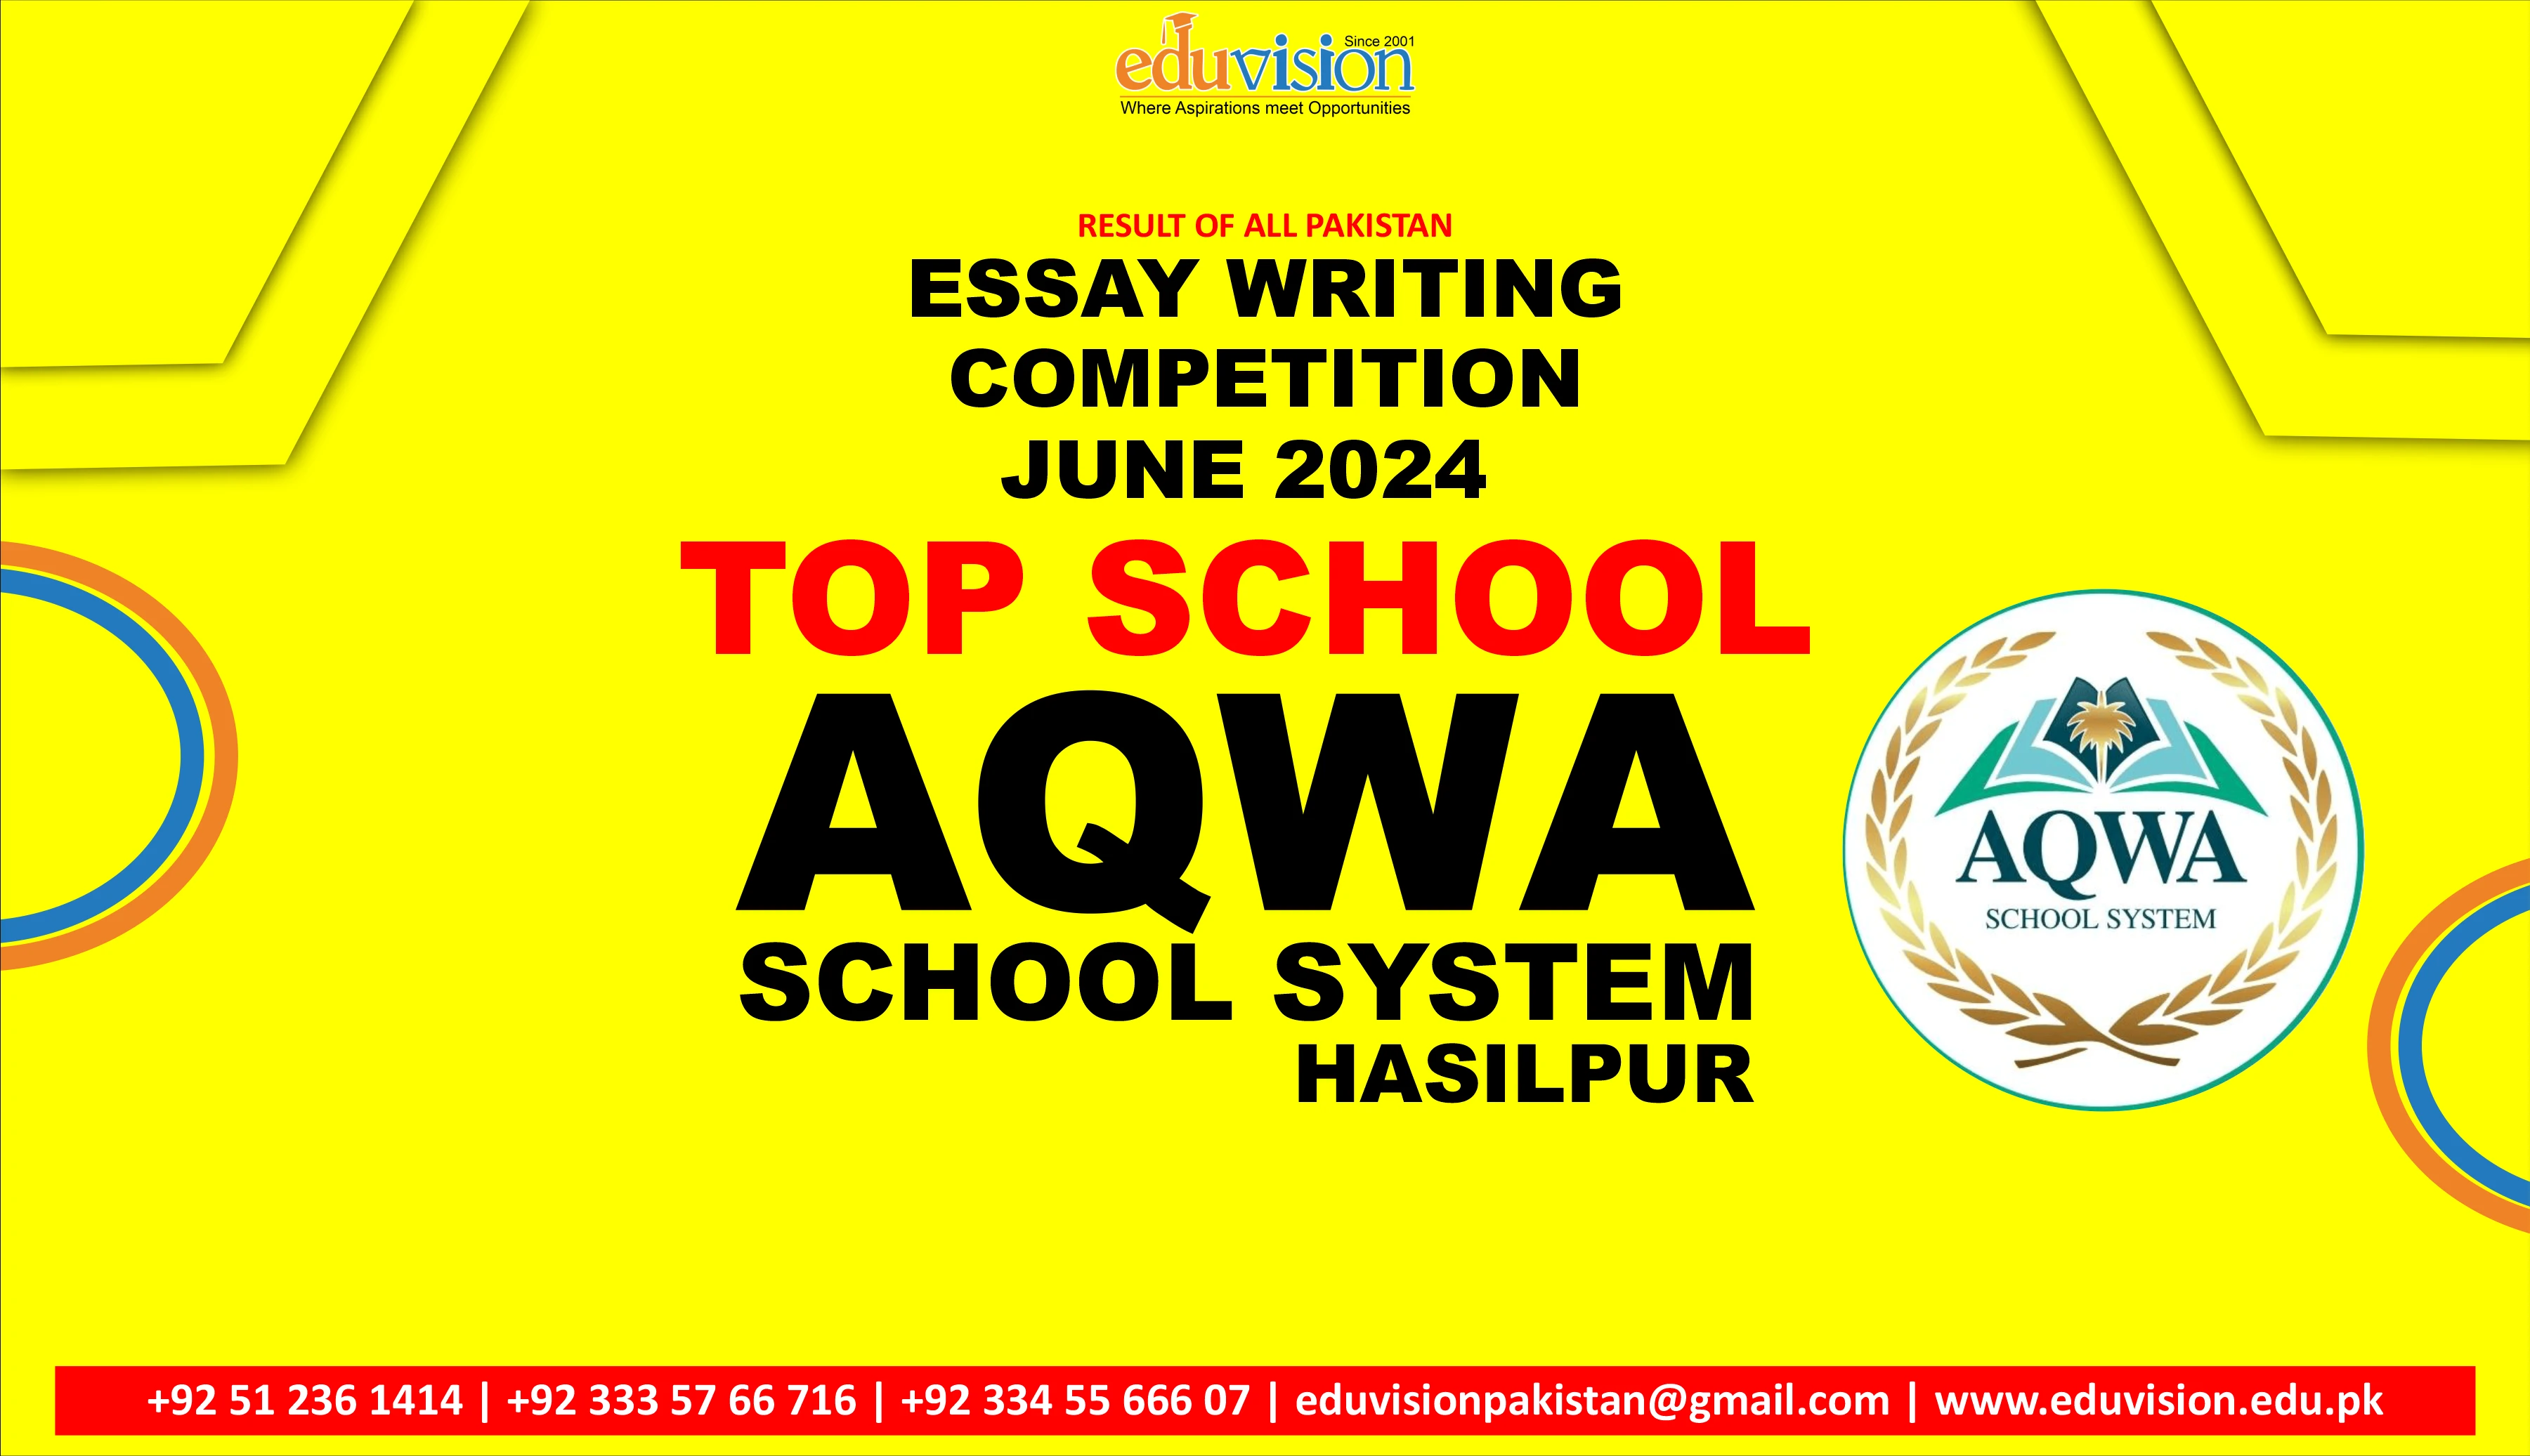 Highest Participation in Essay Writing Competition June 2024